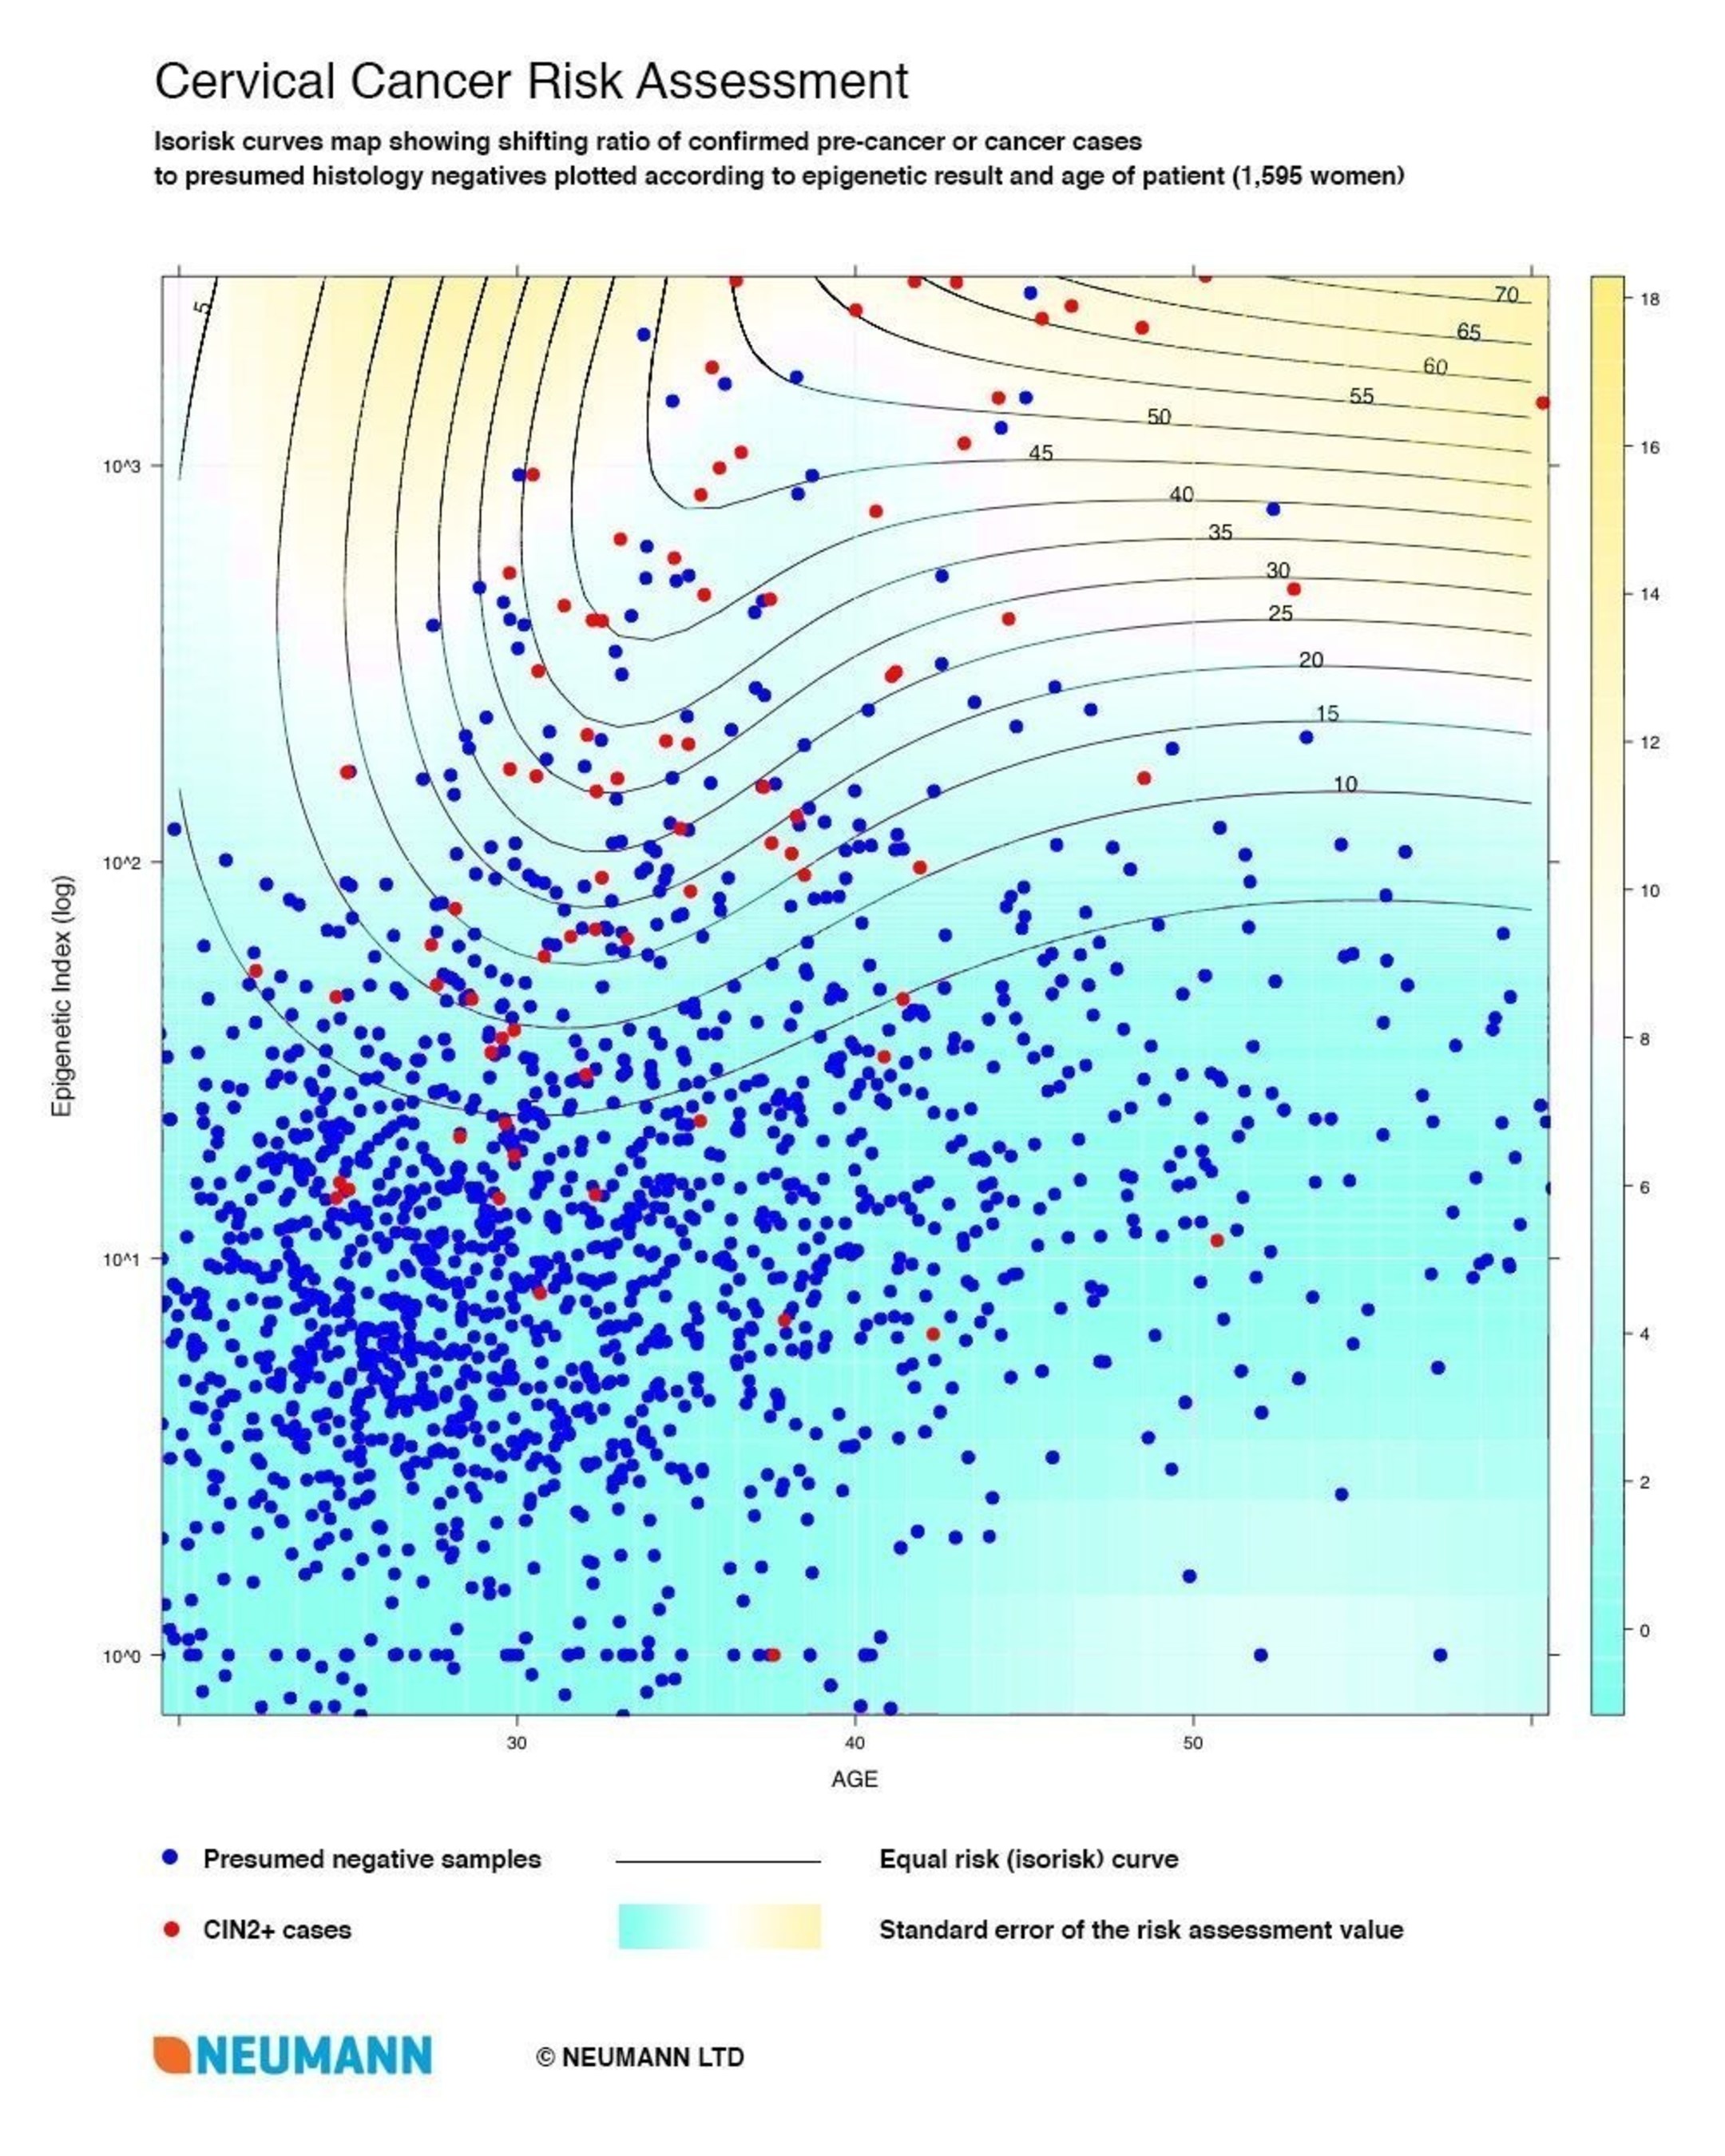 Isorisk curves map. 1,595 data points representing the epigenetic test result (vertical axis, log of index value) and the age (horizontal axis) of HPV-positive women tested in the clinical trial were plotted in 2 groups: red dots are cases with a confirmed dysplasia or cancer diagnosis; blue dots are presumed histology negative samples. The isorisk curves show the shifting ratio of the 2 groups. Background colour indicates the standard error of the risk level estimate.